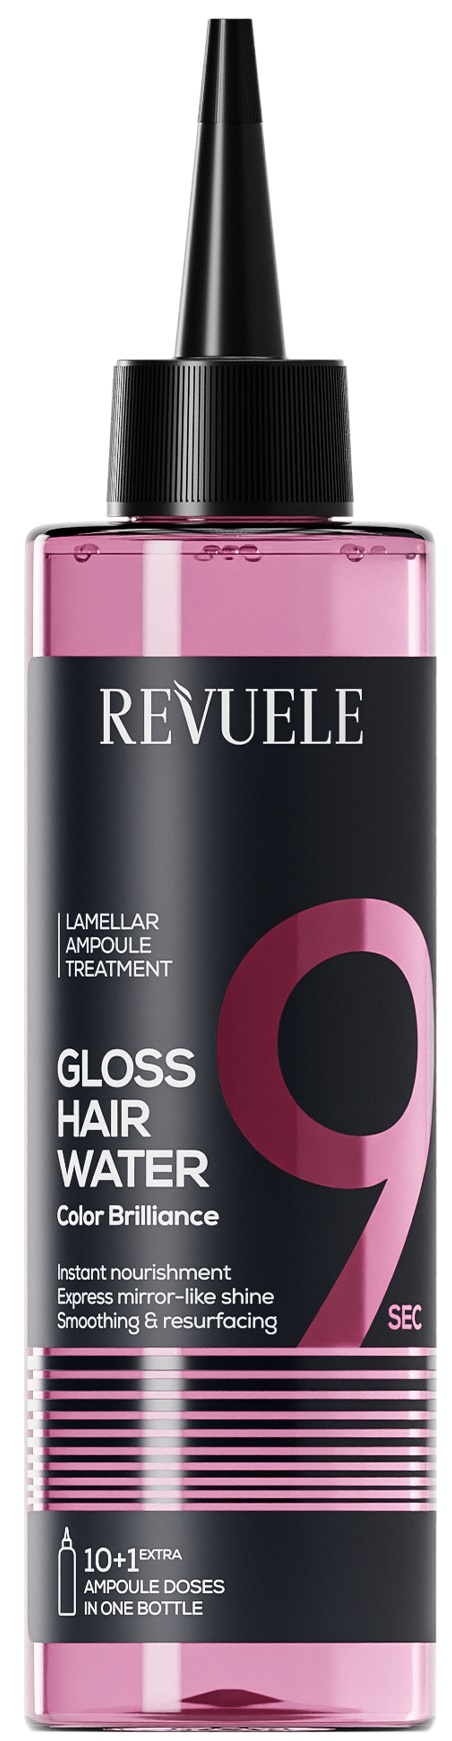 Revuele Gloss Hair Water Color Brilliance